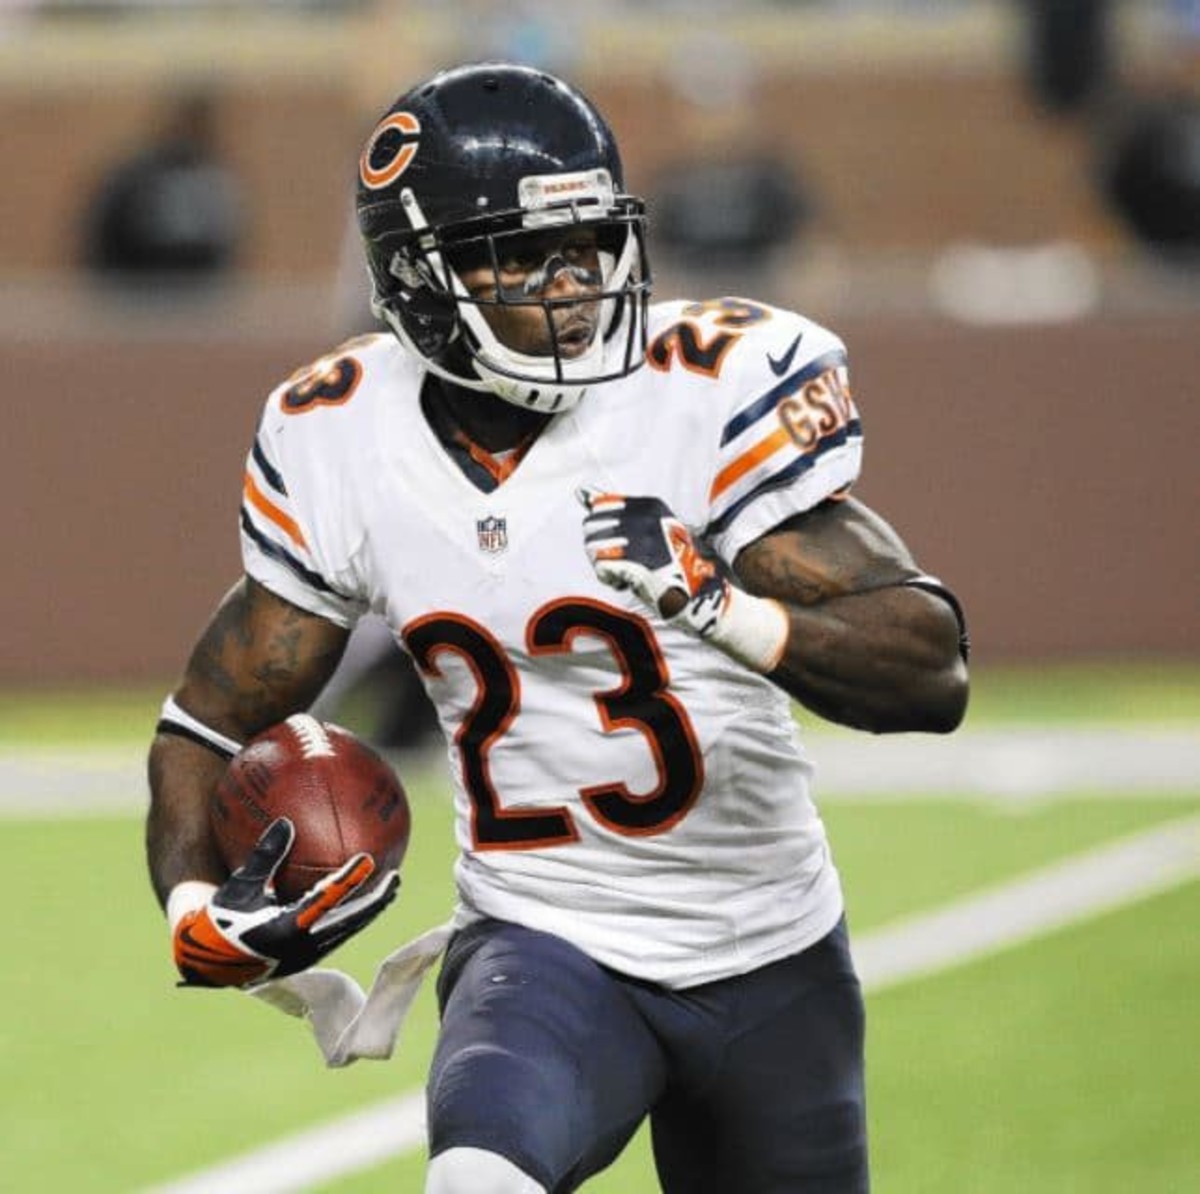 Devin Hester is nominated for 2022 hall of fame.